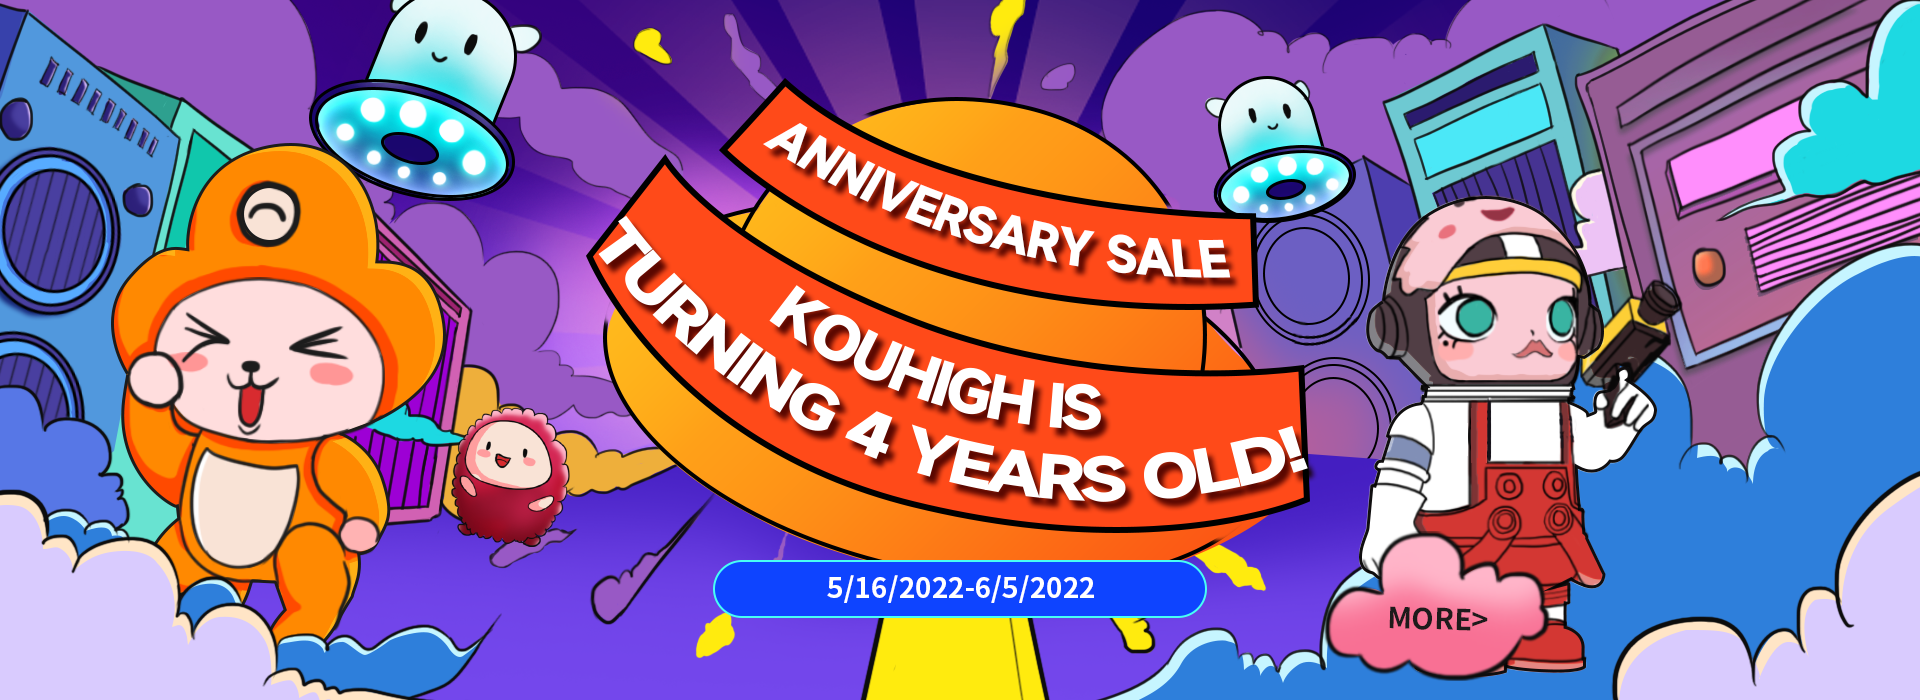 Kouhigh is turning 4 years old!